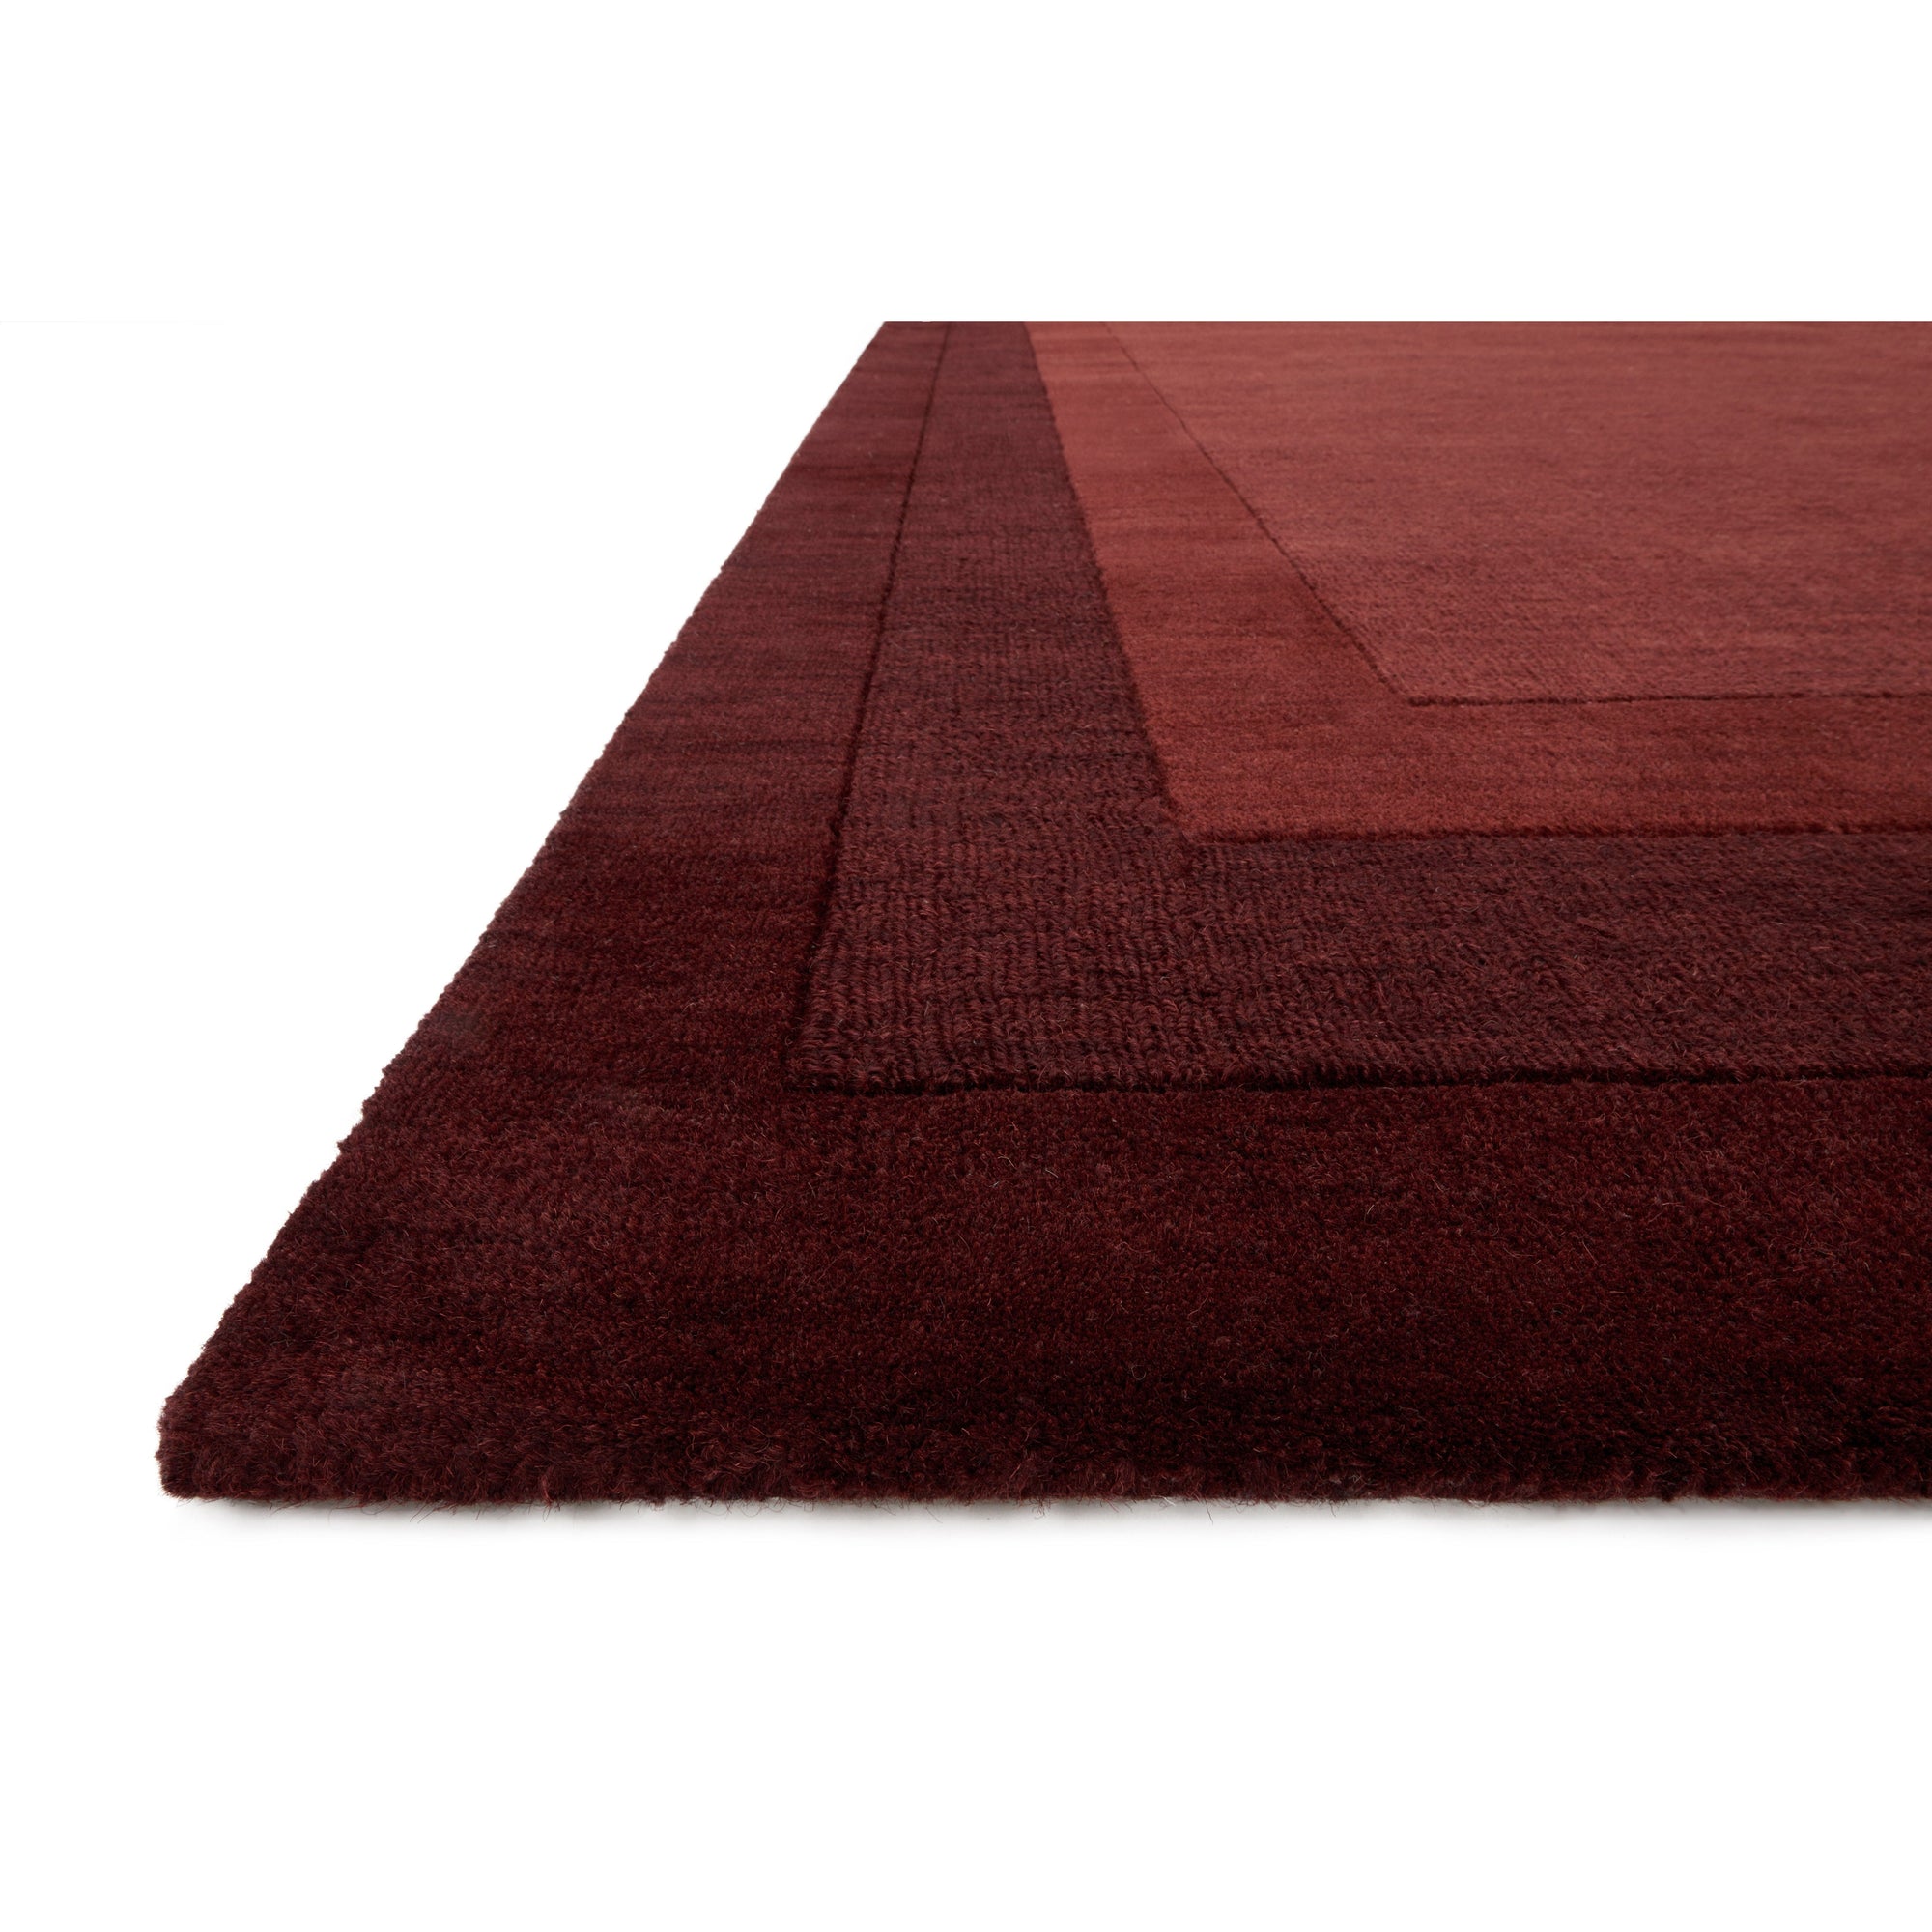 Rugs by Roo Loloi Hamilton Red Area Rug in size 18" x 18" Sample